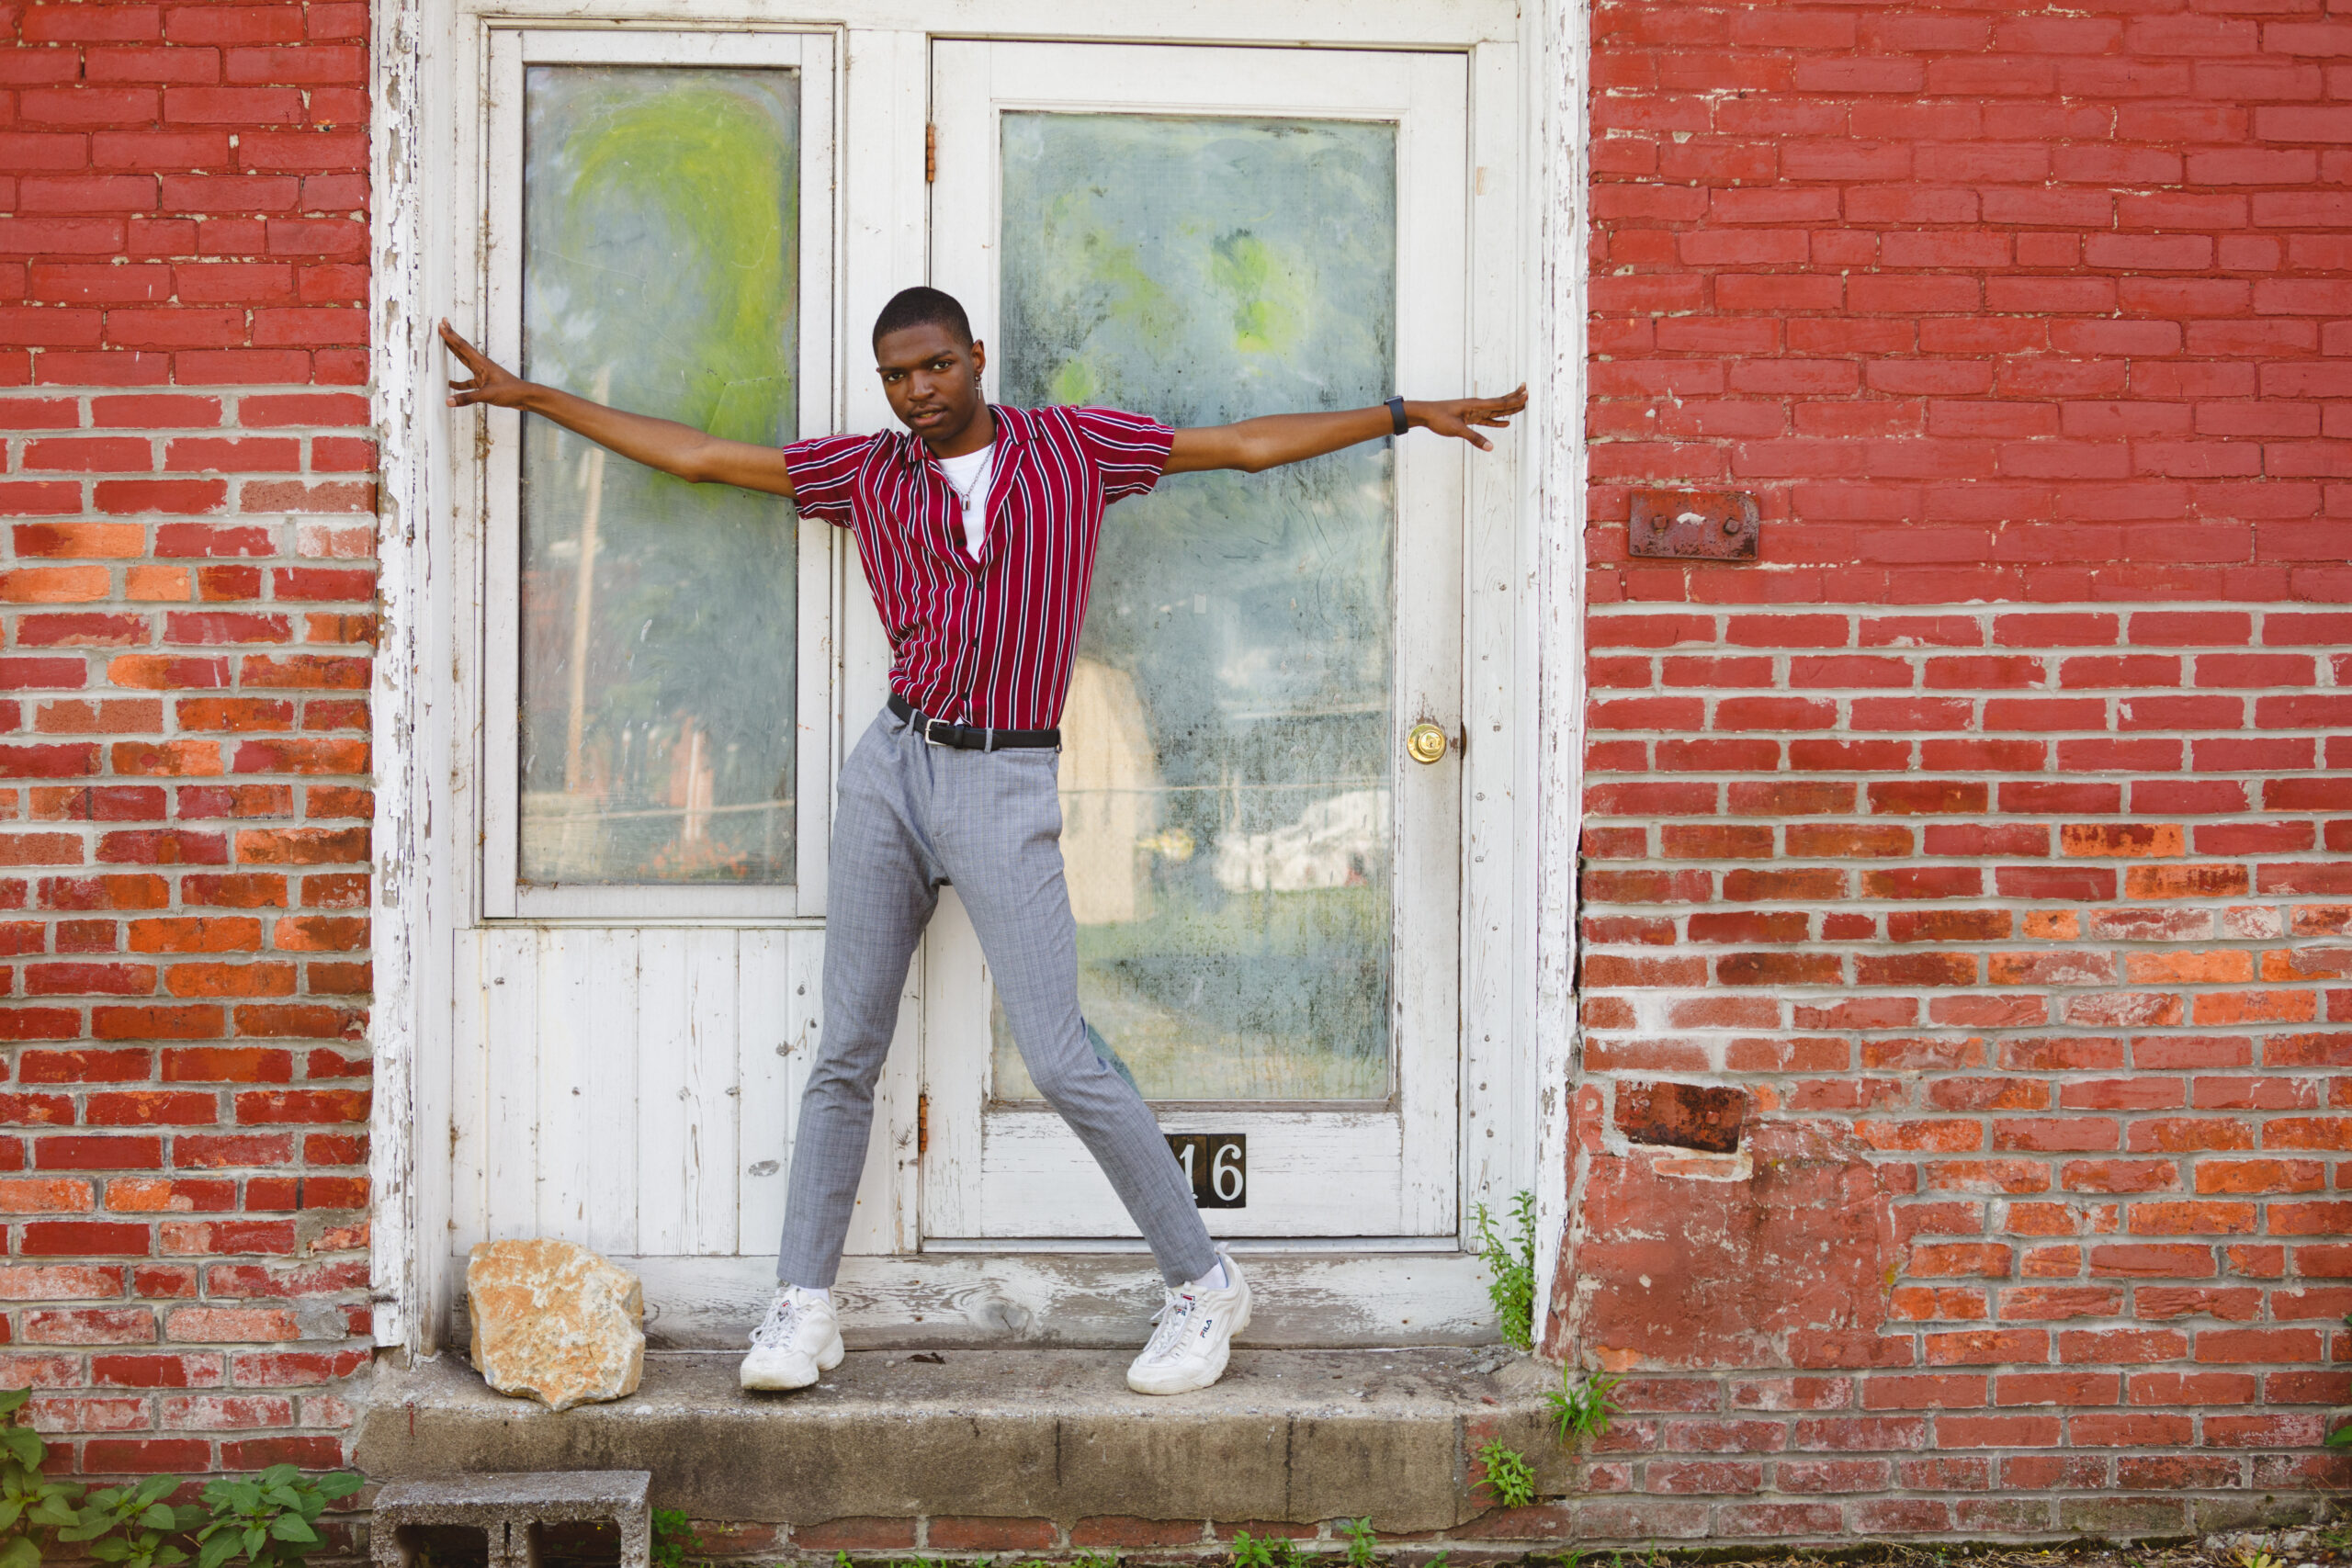 Akiva models in front of a red brick wall in a trendy striped button down top for his senior boy photo shoot.